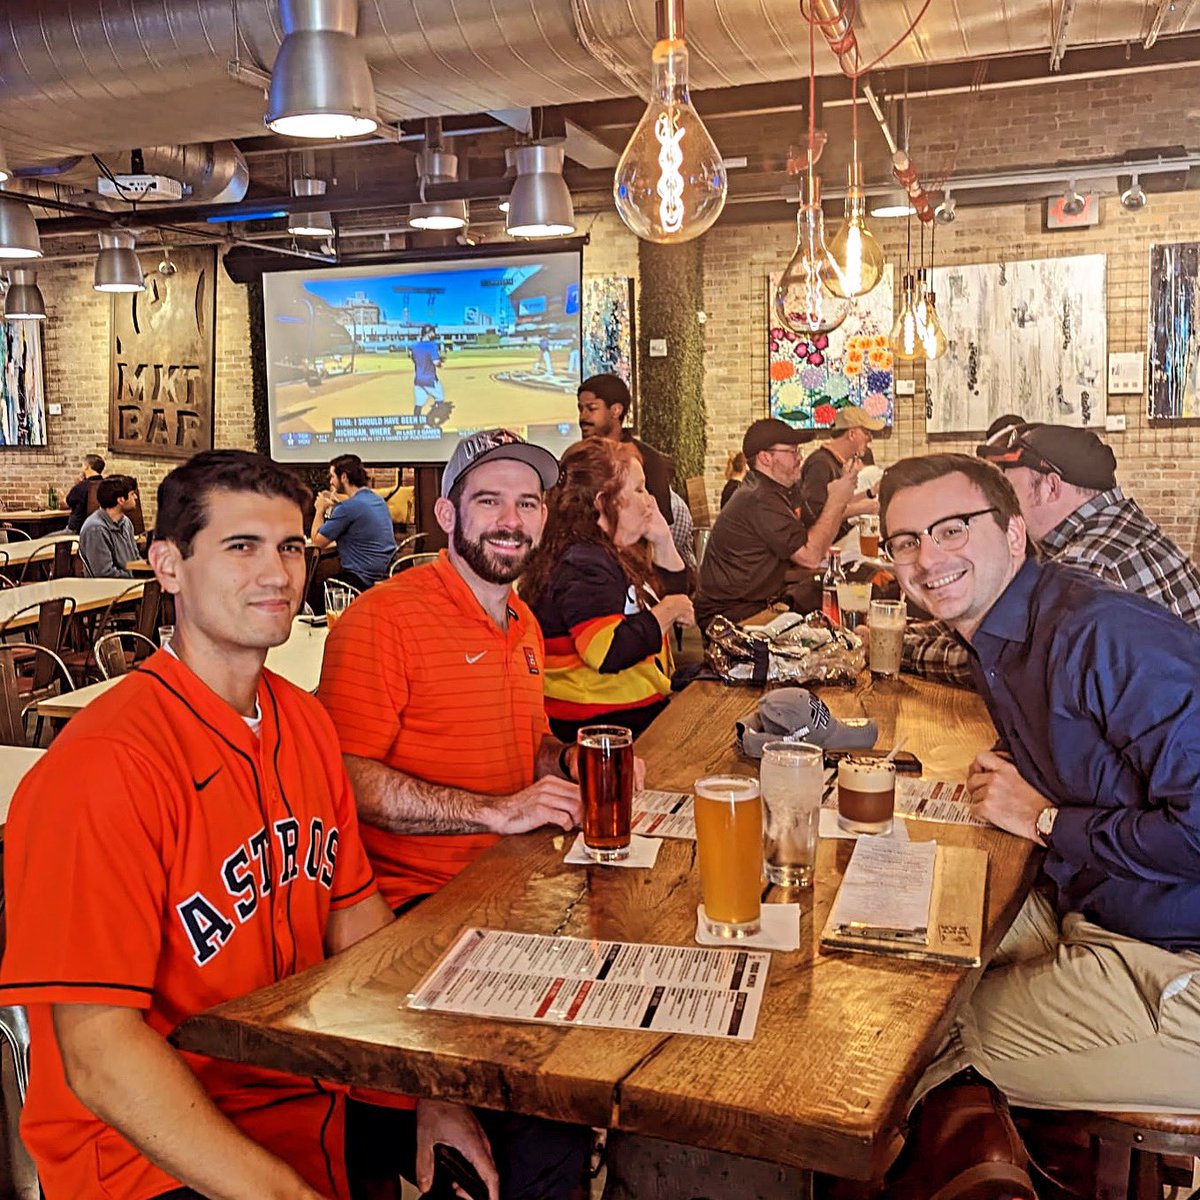 Come watch the Astros in Game 5 vs the hated Arlington Rangers! Did we mention the game and happy hour specials both start at 4 PM?! 🙌 🍻 🍷 ⚾️ #astros #alcs #rangers #mlb